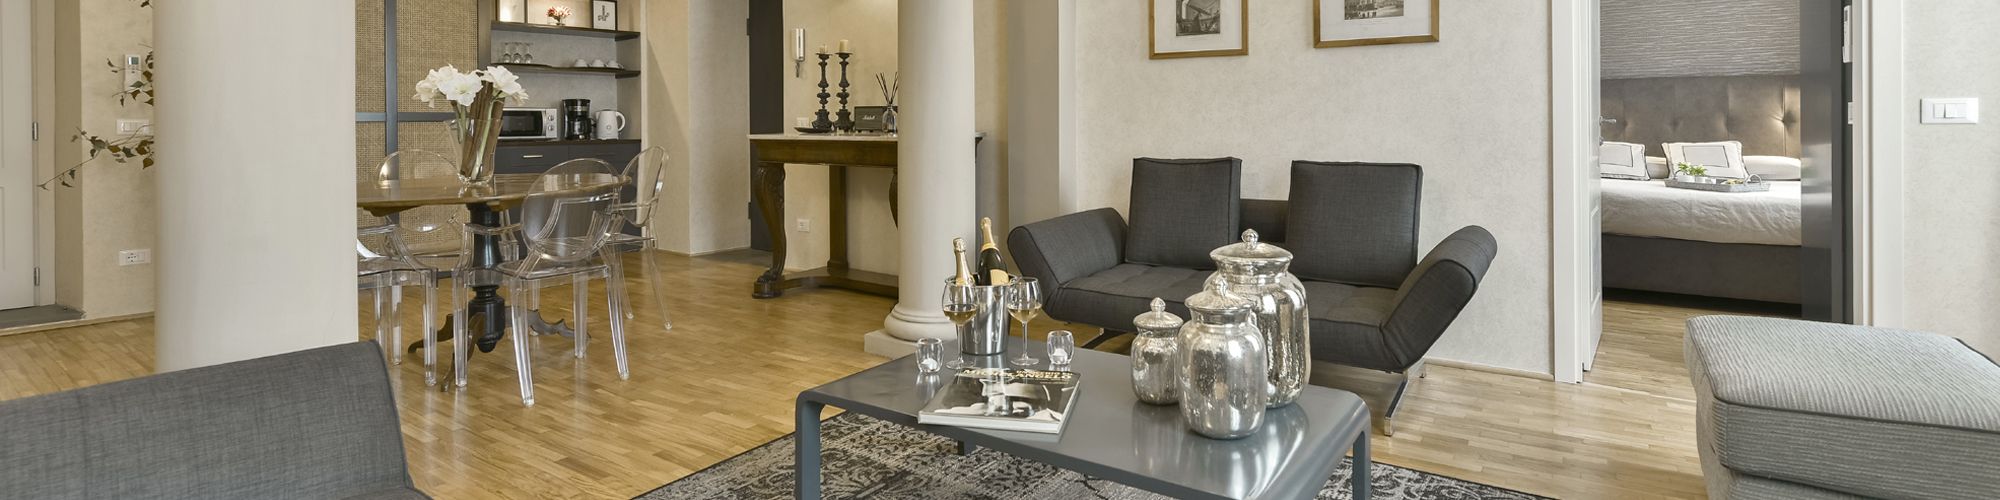 sophisticated living area of the Piazza Pitti 22 apartment